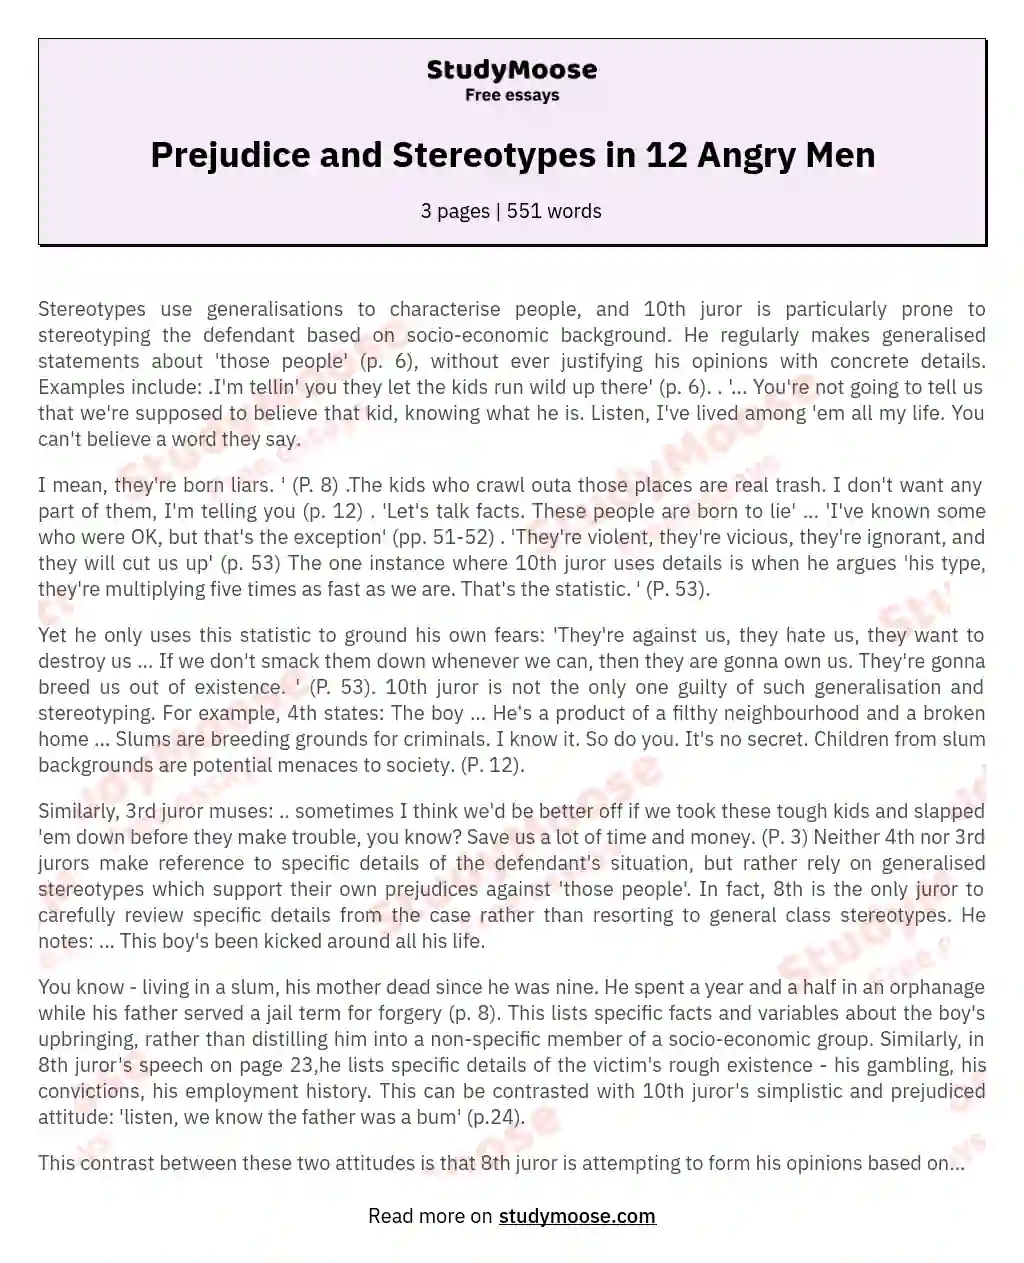 Prejudice and Stereotypes in 12 Angry Men essay